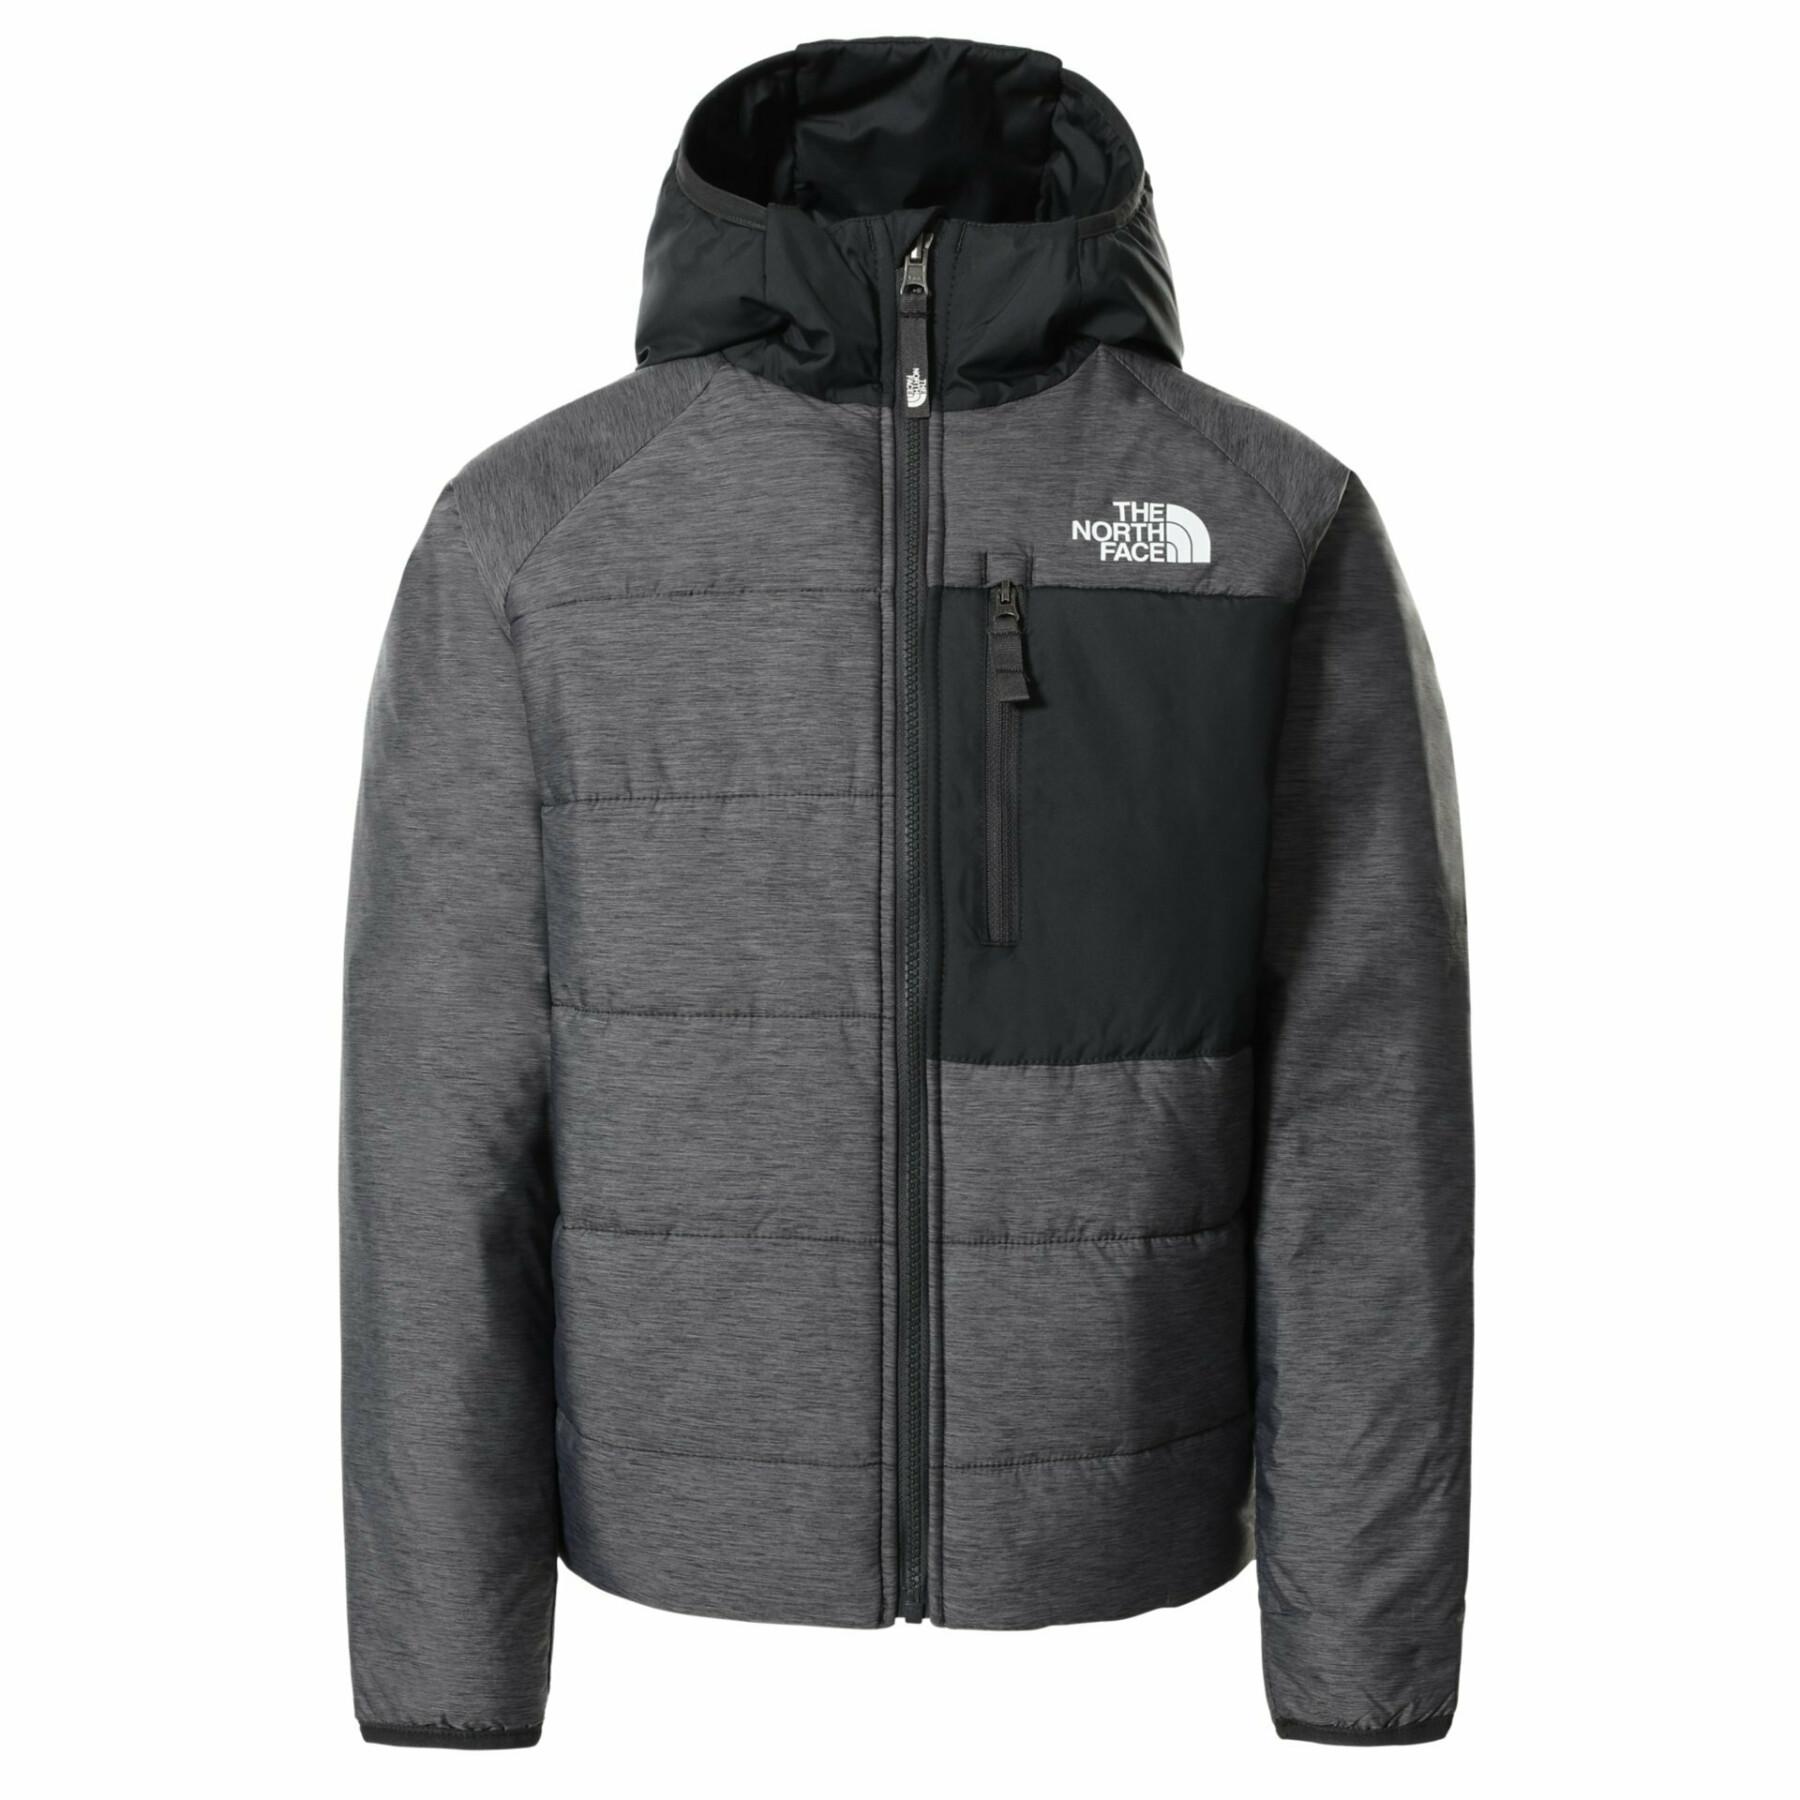 Boy's reversible jacket The North Face Perrito